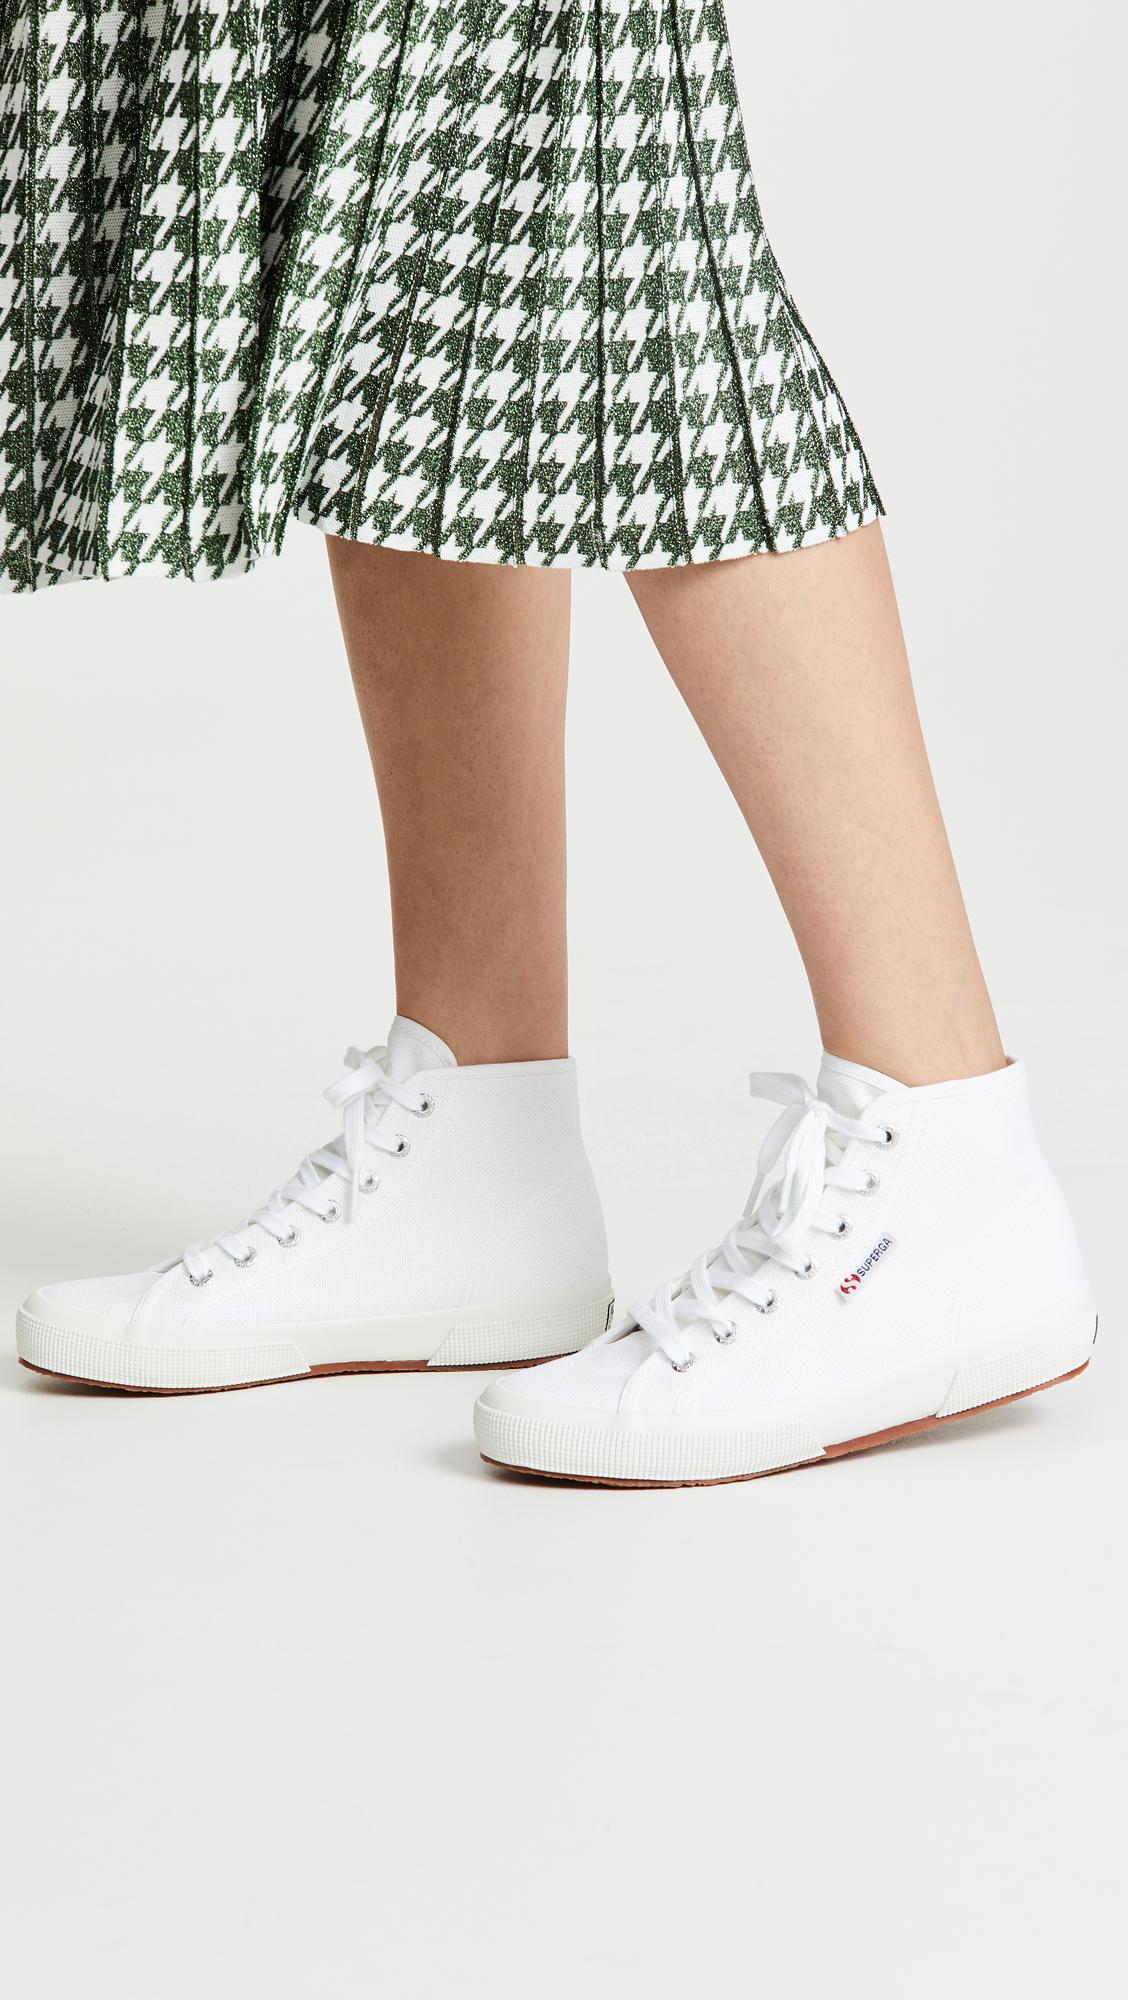 Superga Canvas 2795 Cotu High Top Classic Sneakers in White - Lyst